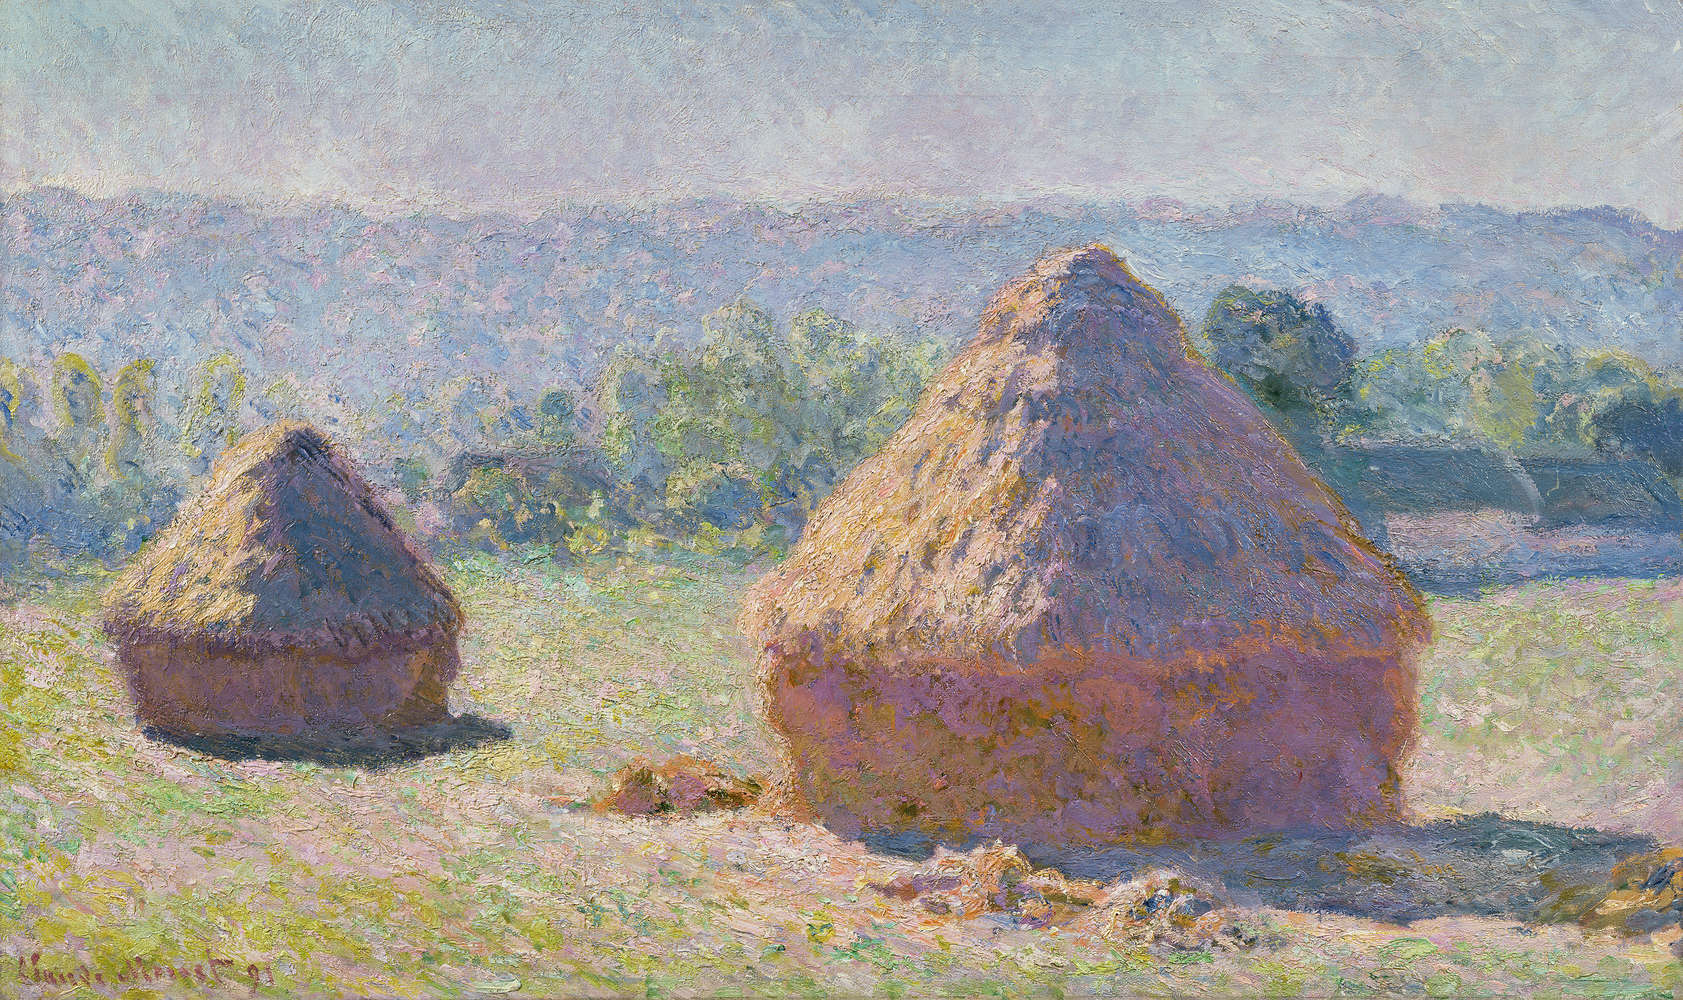             Photo wallpaper "Straw barn at the end of summer" by Claude Monet
        